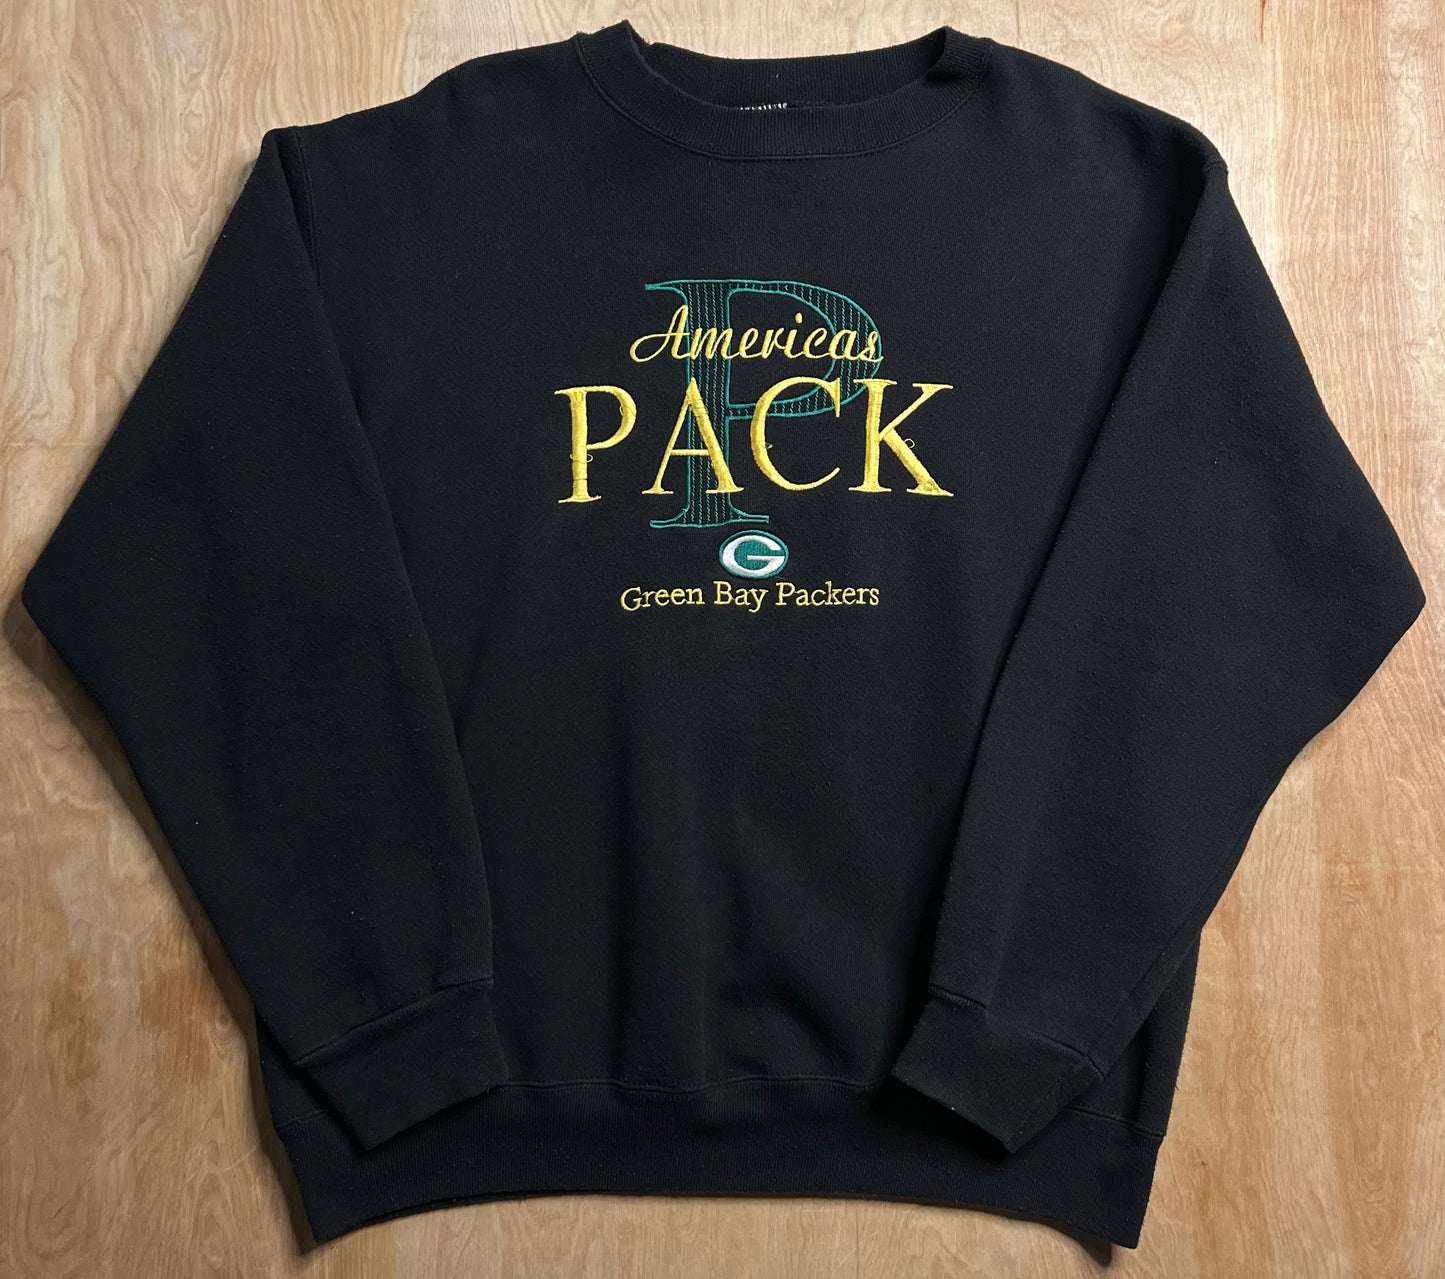 1990's Green Bay Packers "Americas Pack" Crewneck